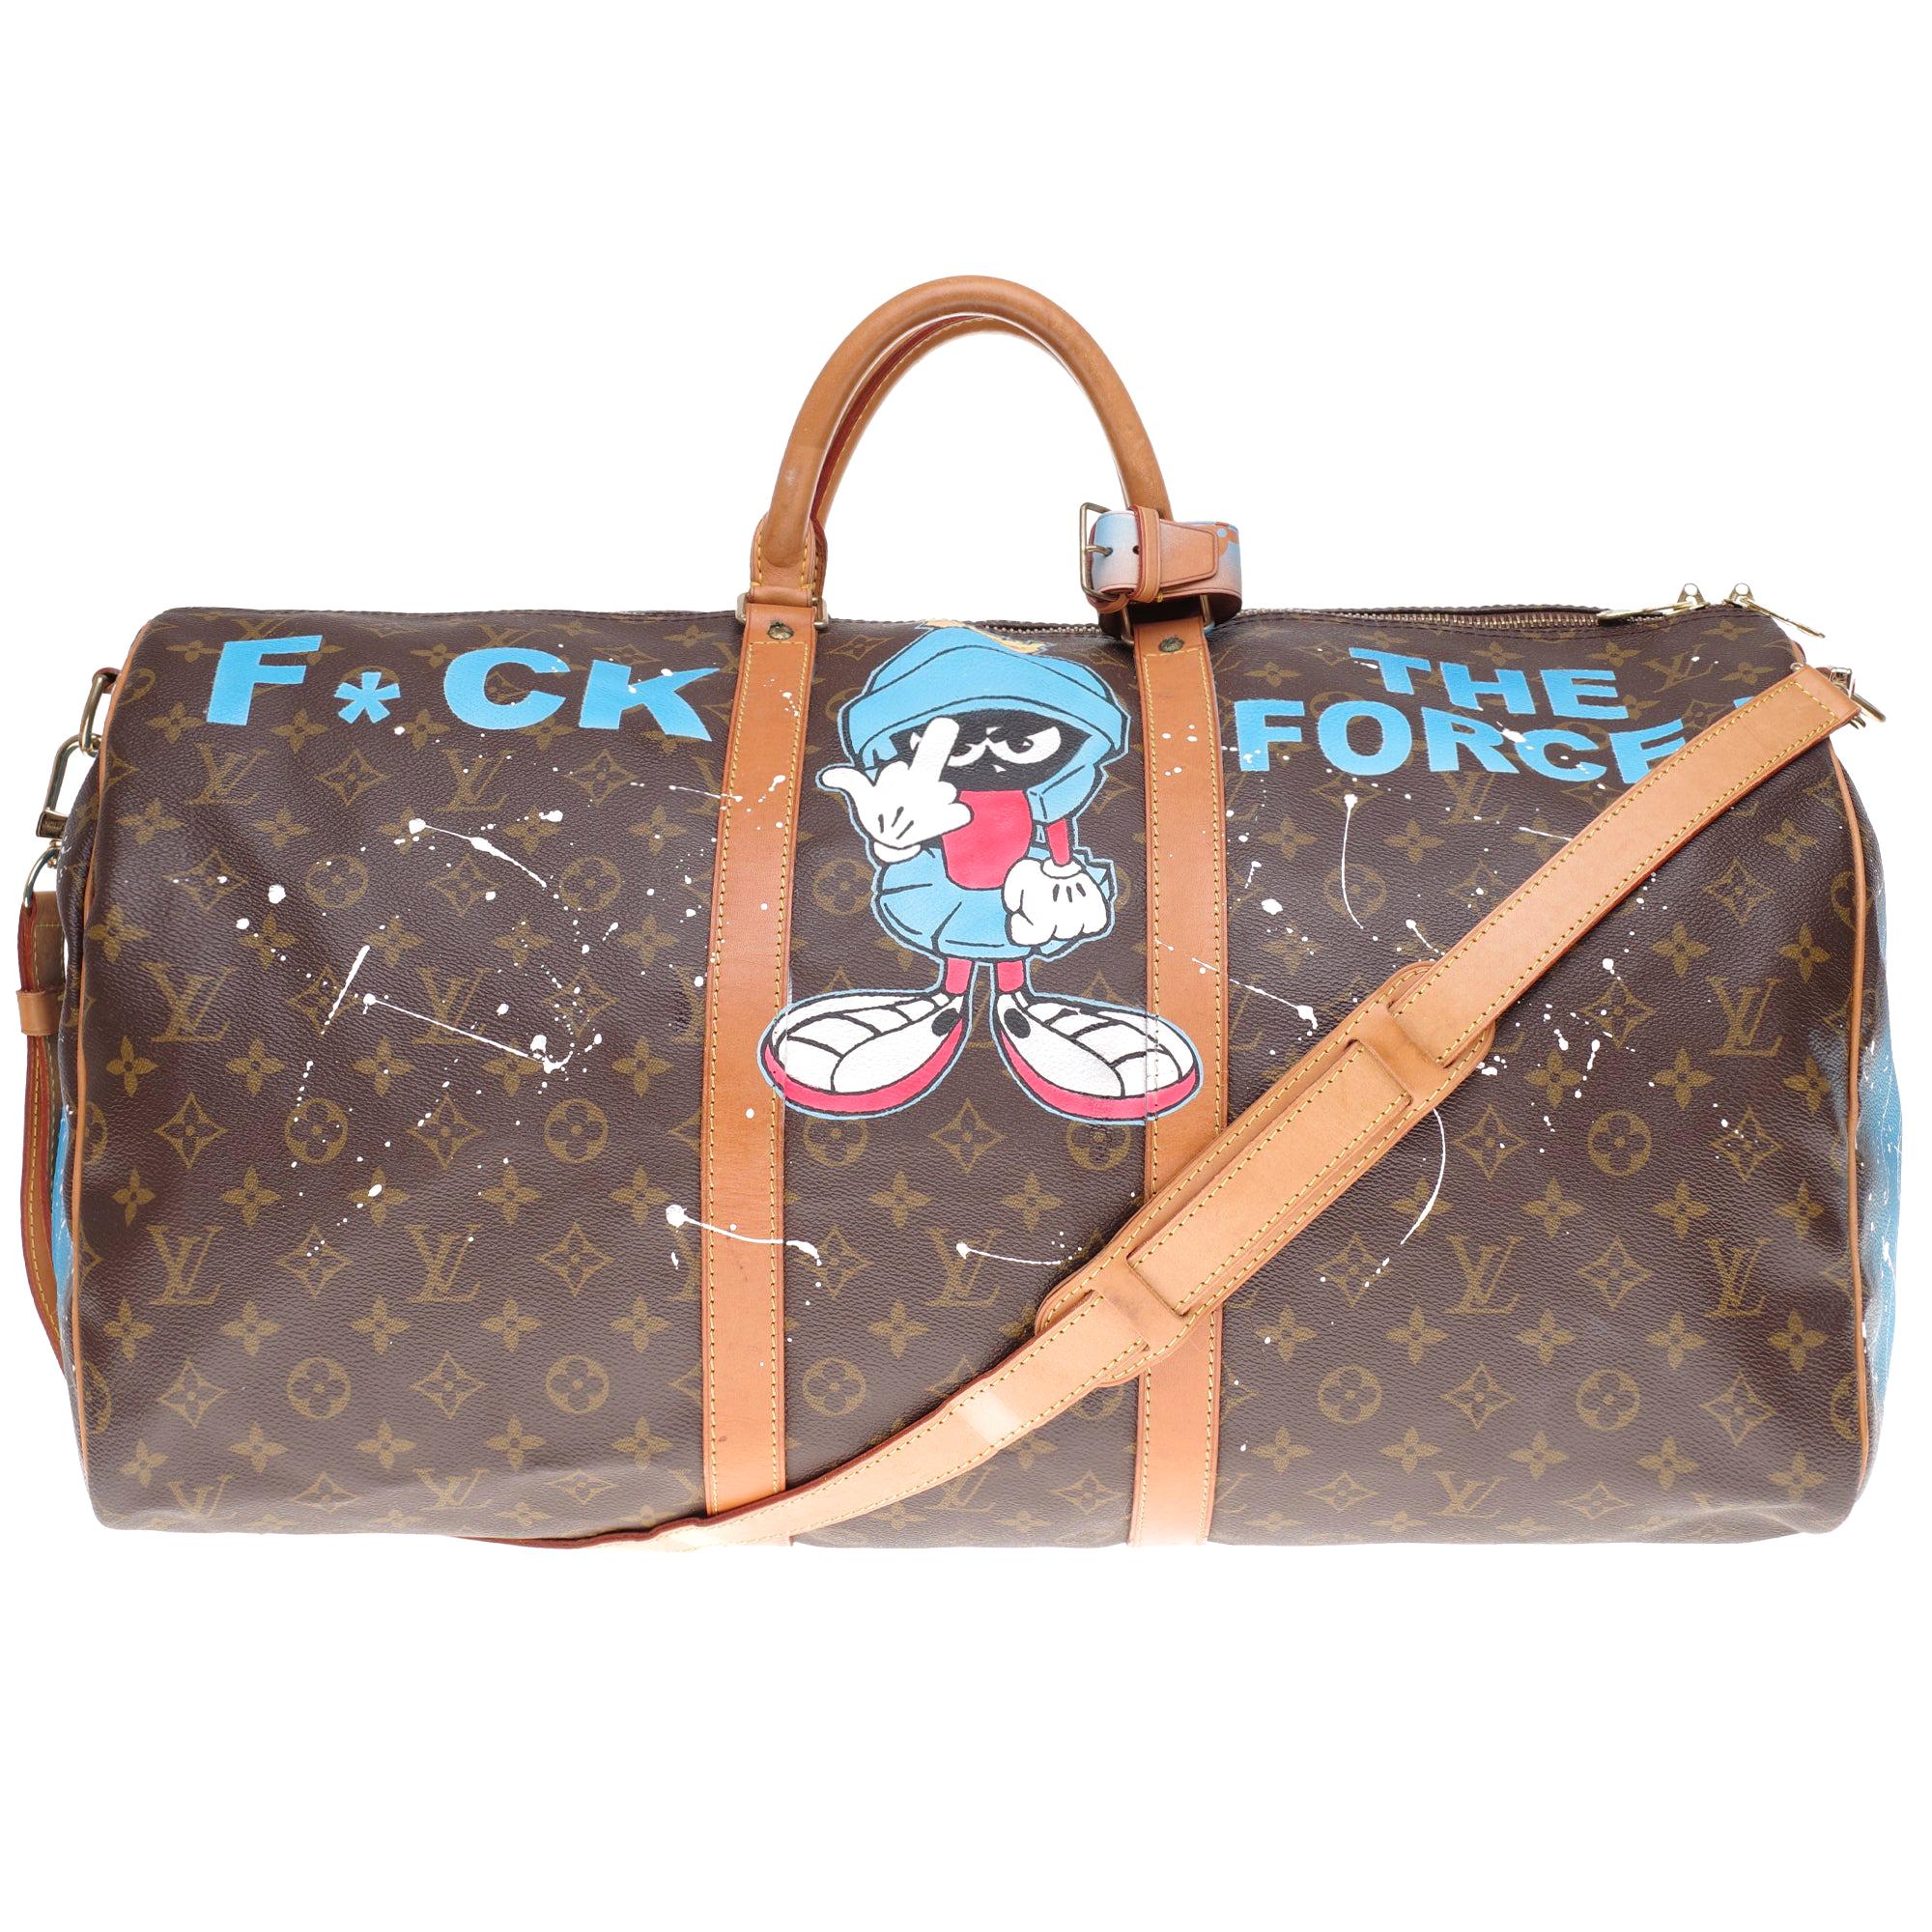 Louis Vuitton Keepall 55 strap travel bag customized "Popeye" by PatBo!